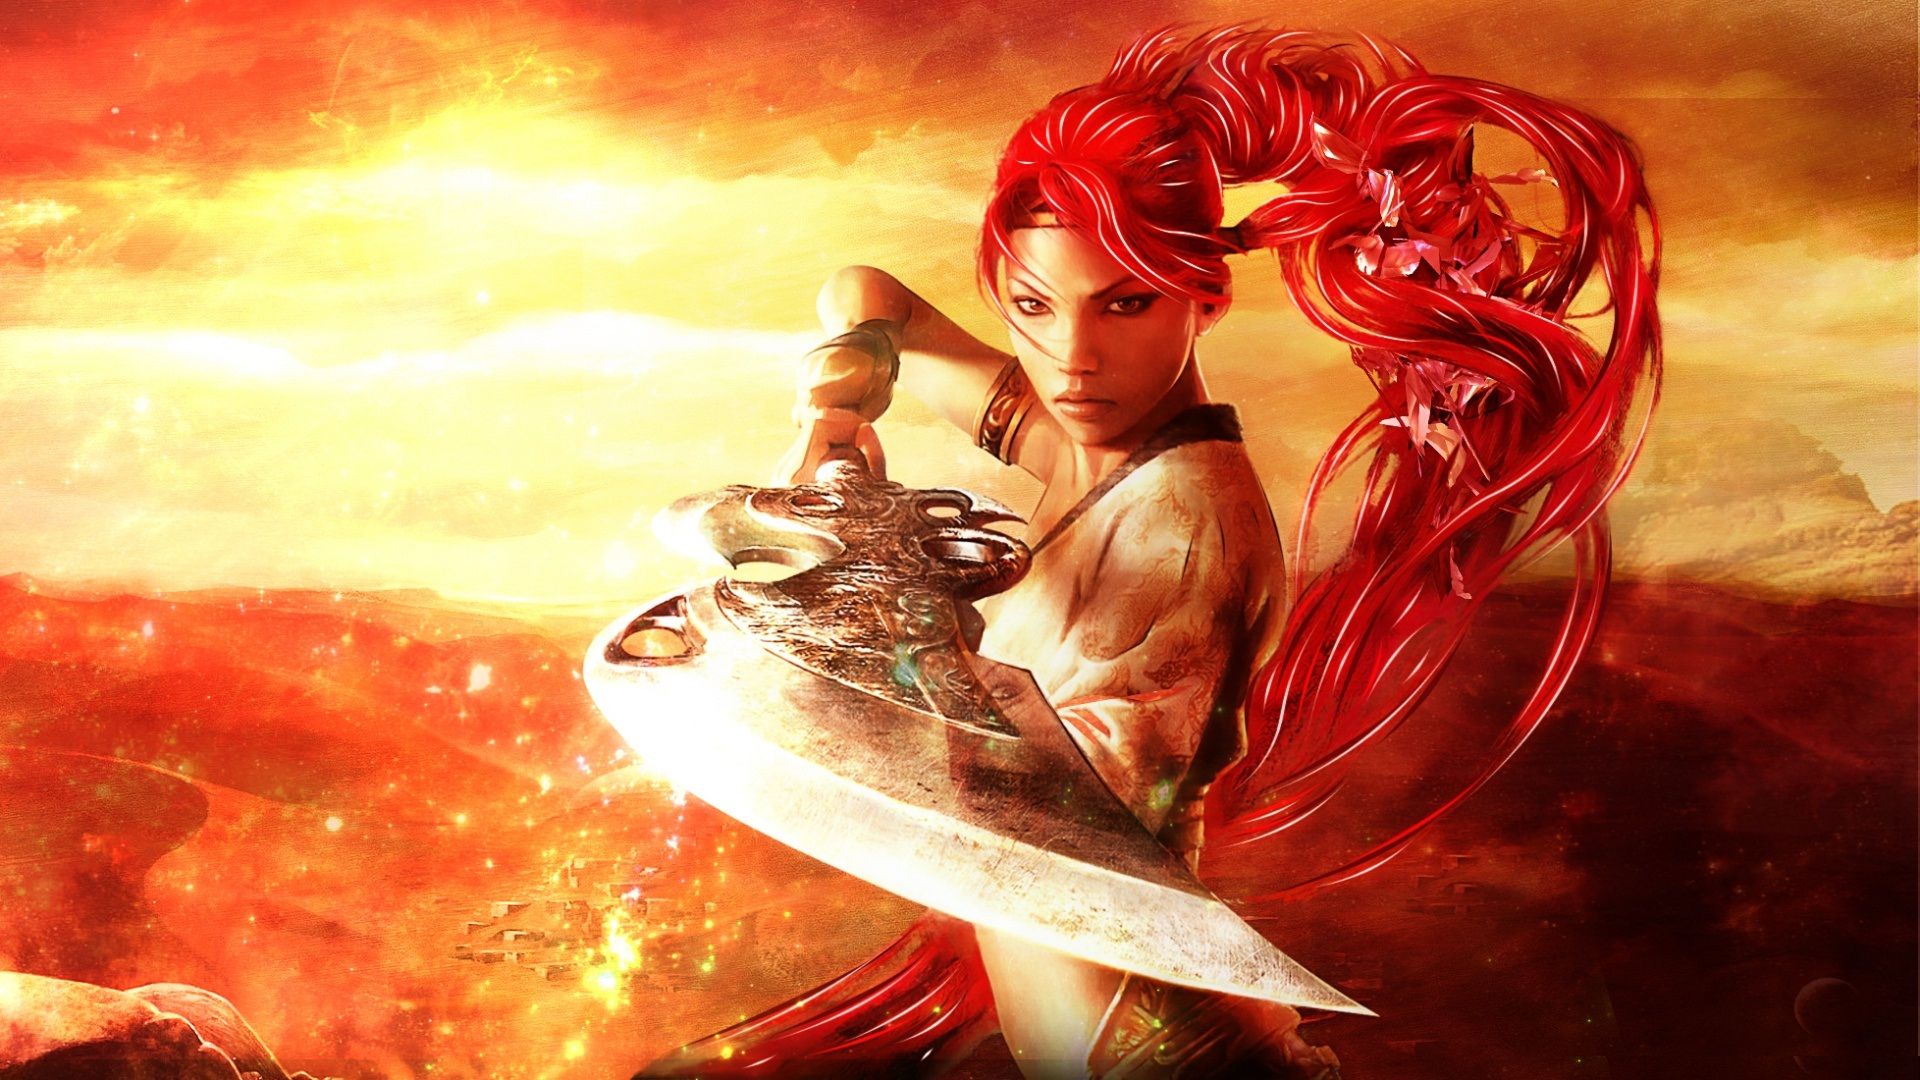 Heavenly Sword Game Image And Wallpaper